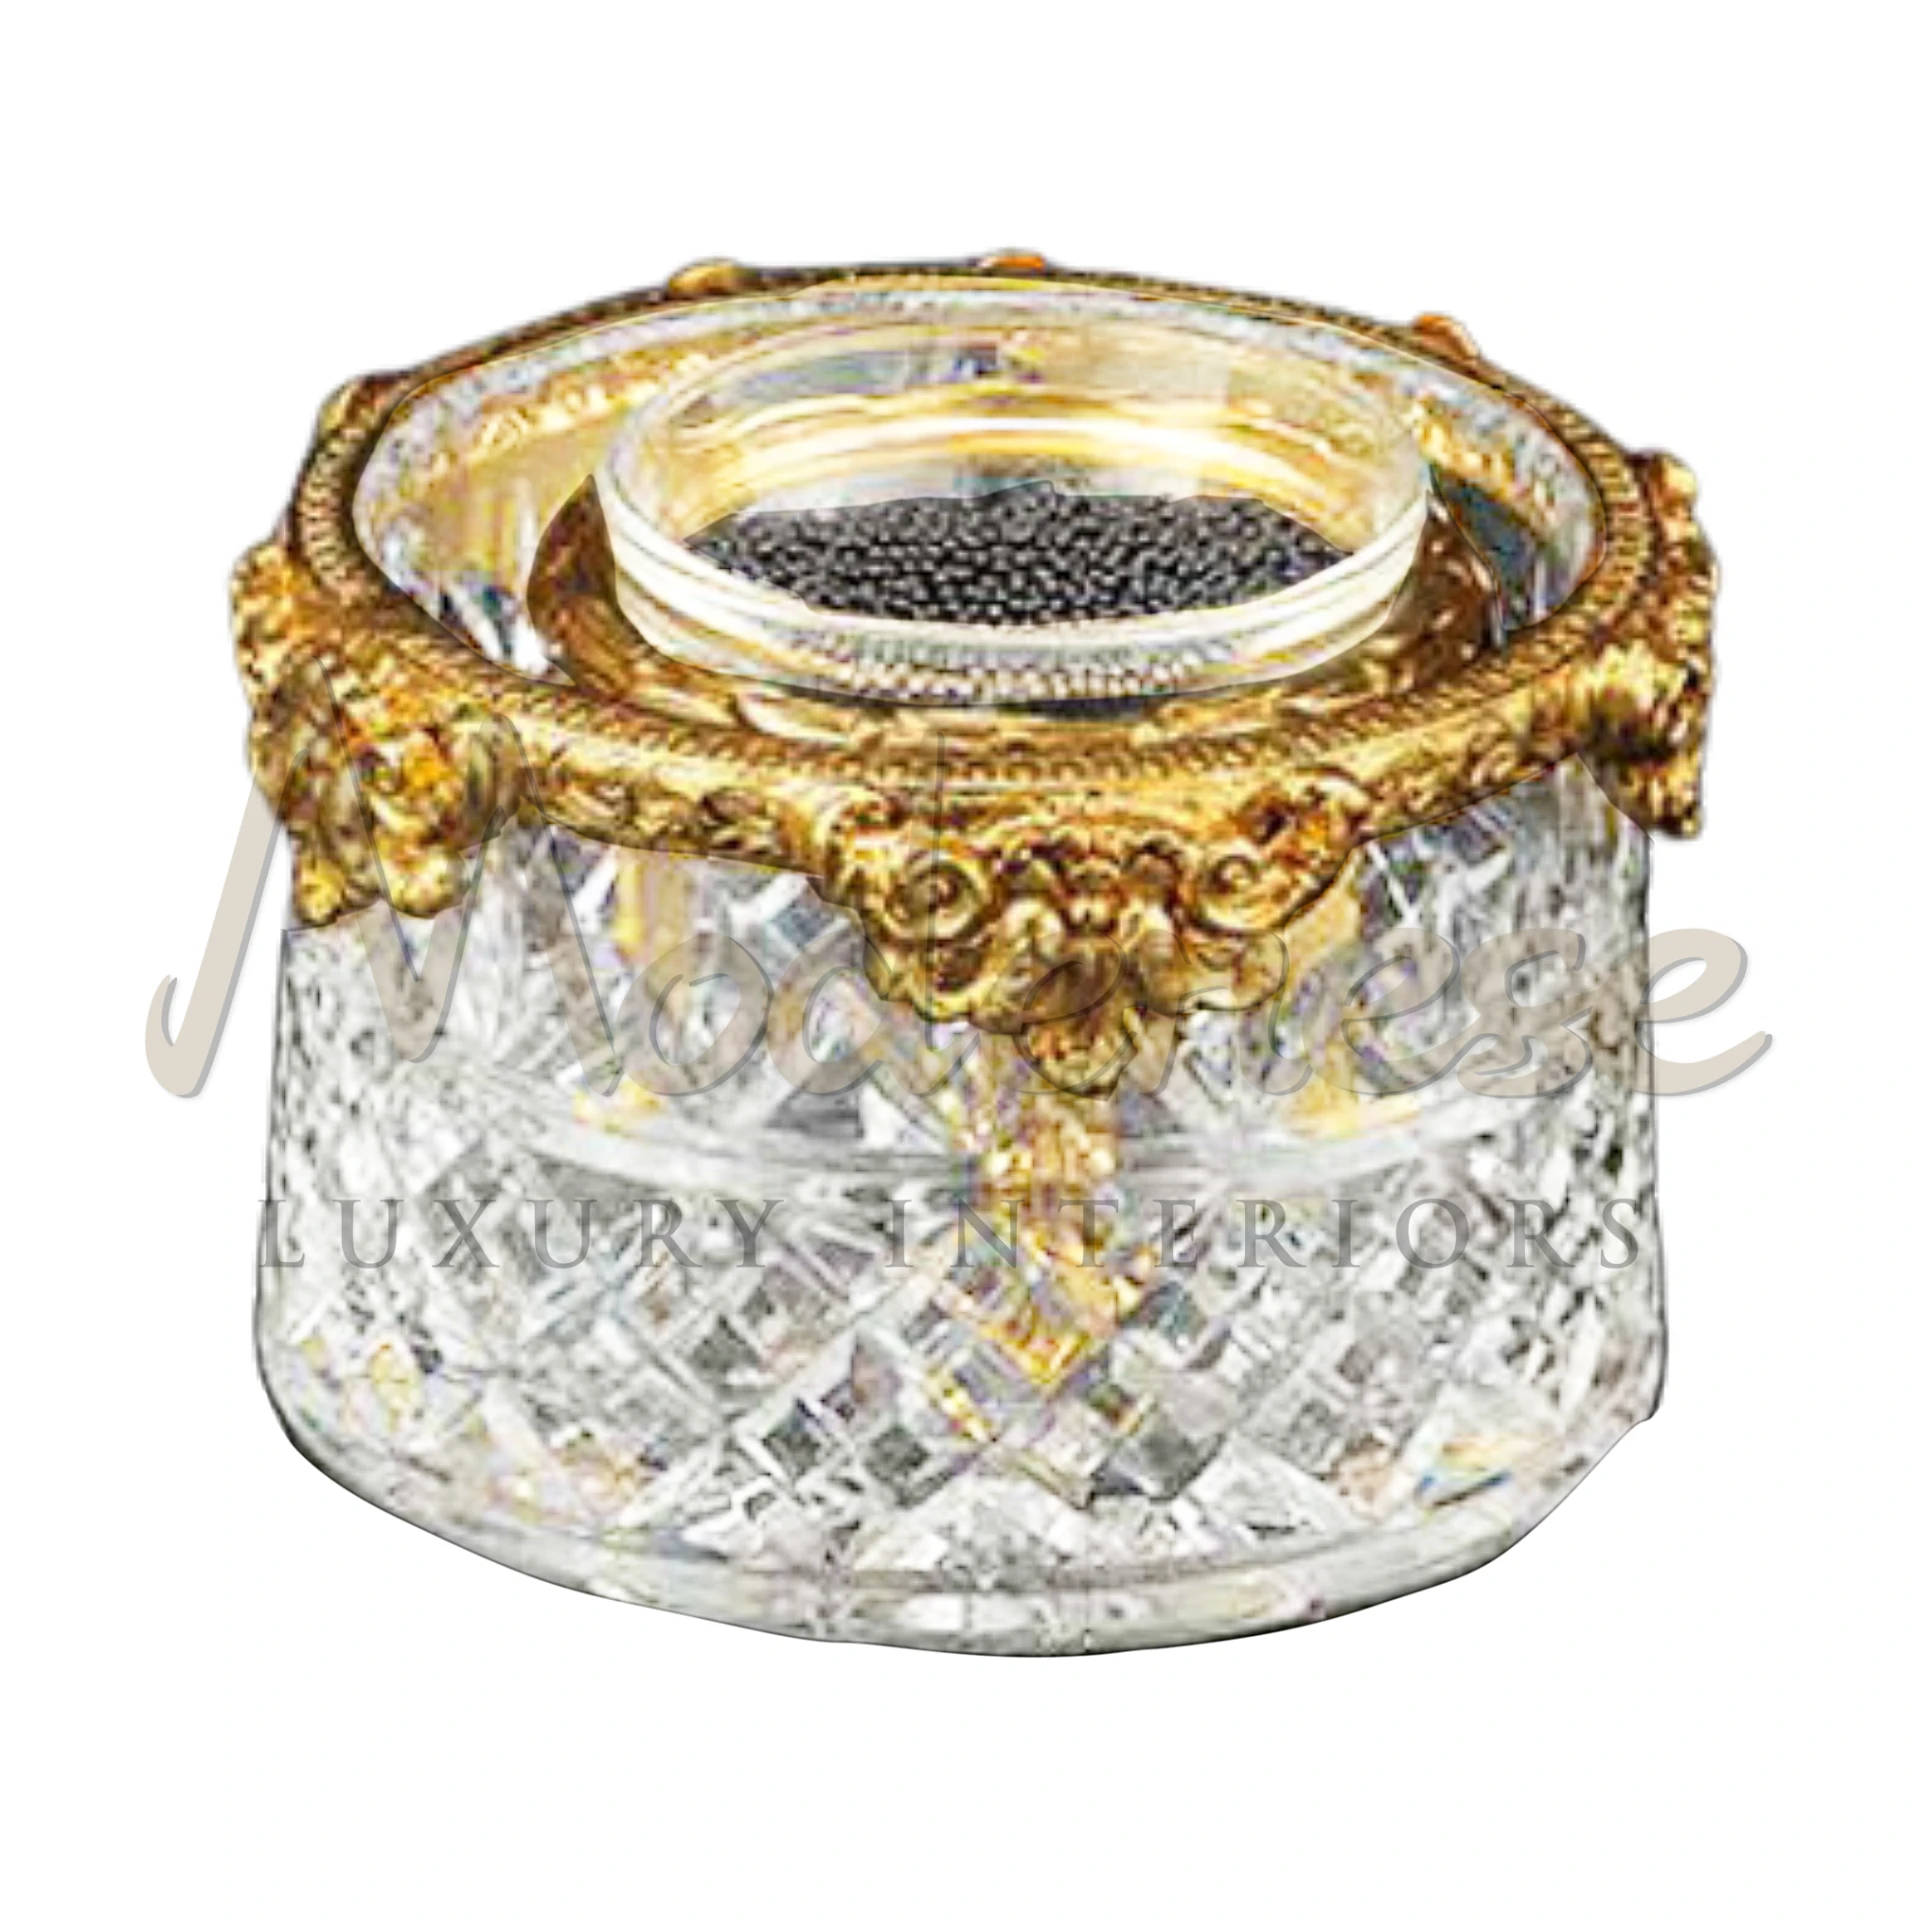 Caviar Box, elegantly gilded with gold, showcasing intricate designs, embodies luxury interior design with classic and baroque sophistication.